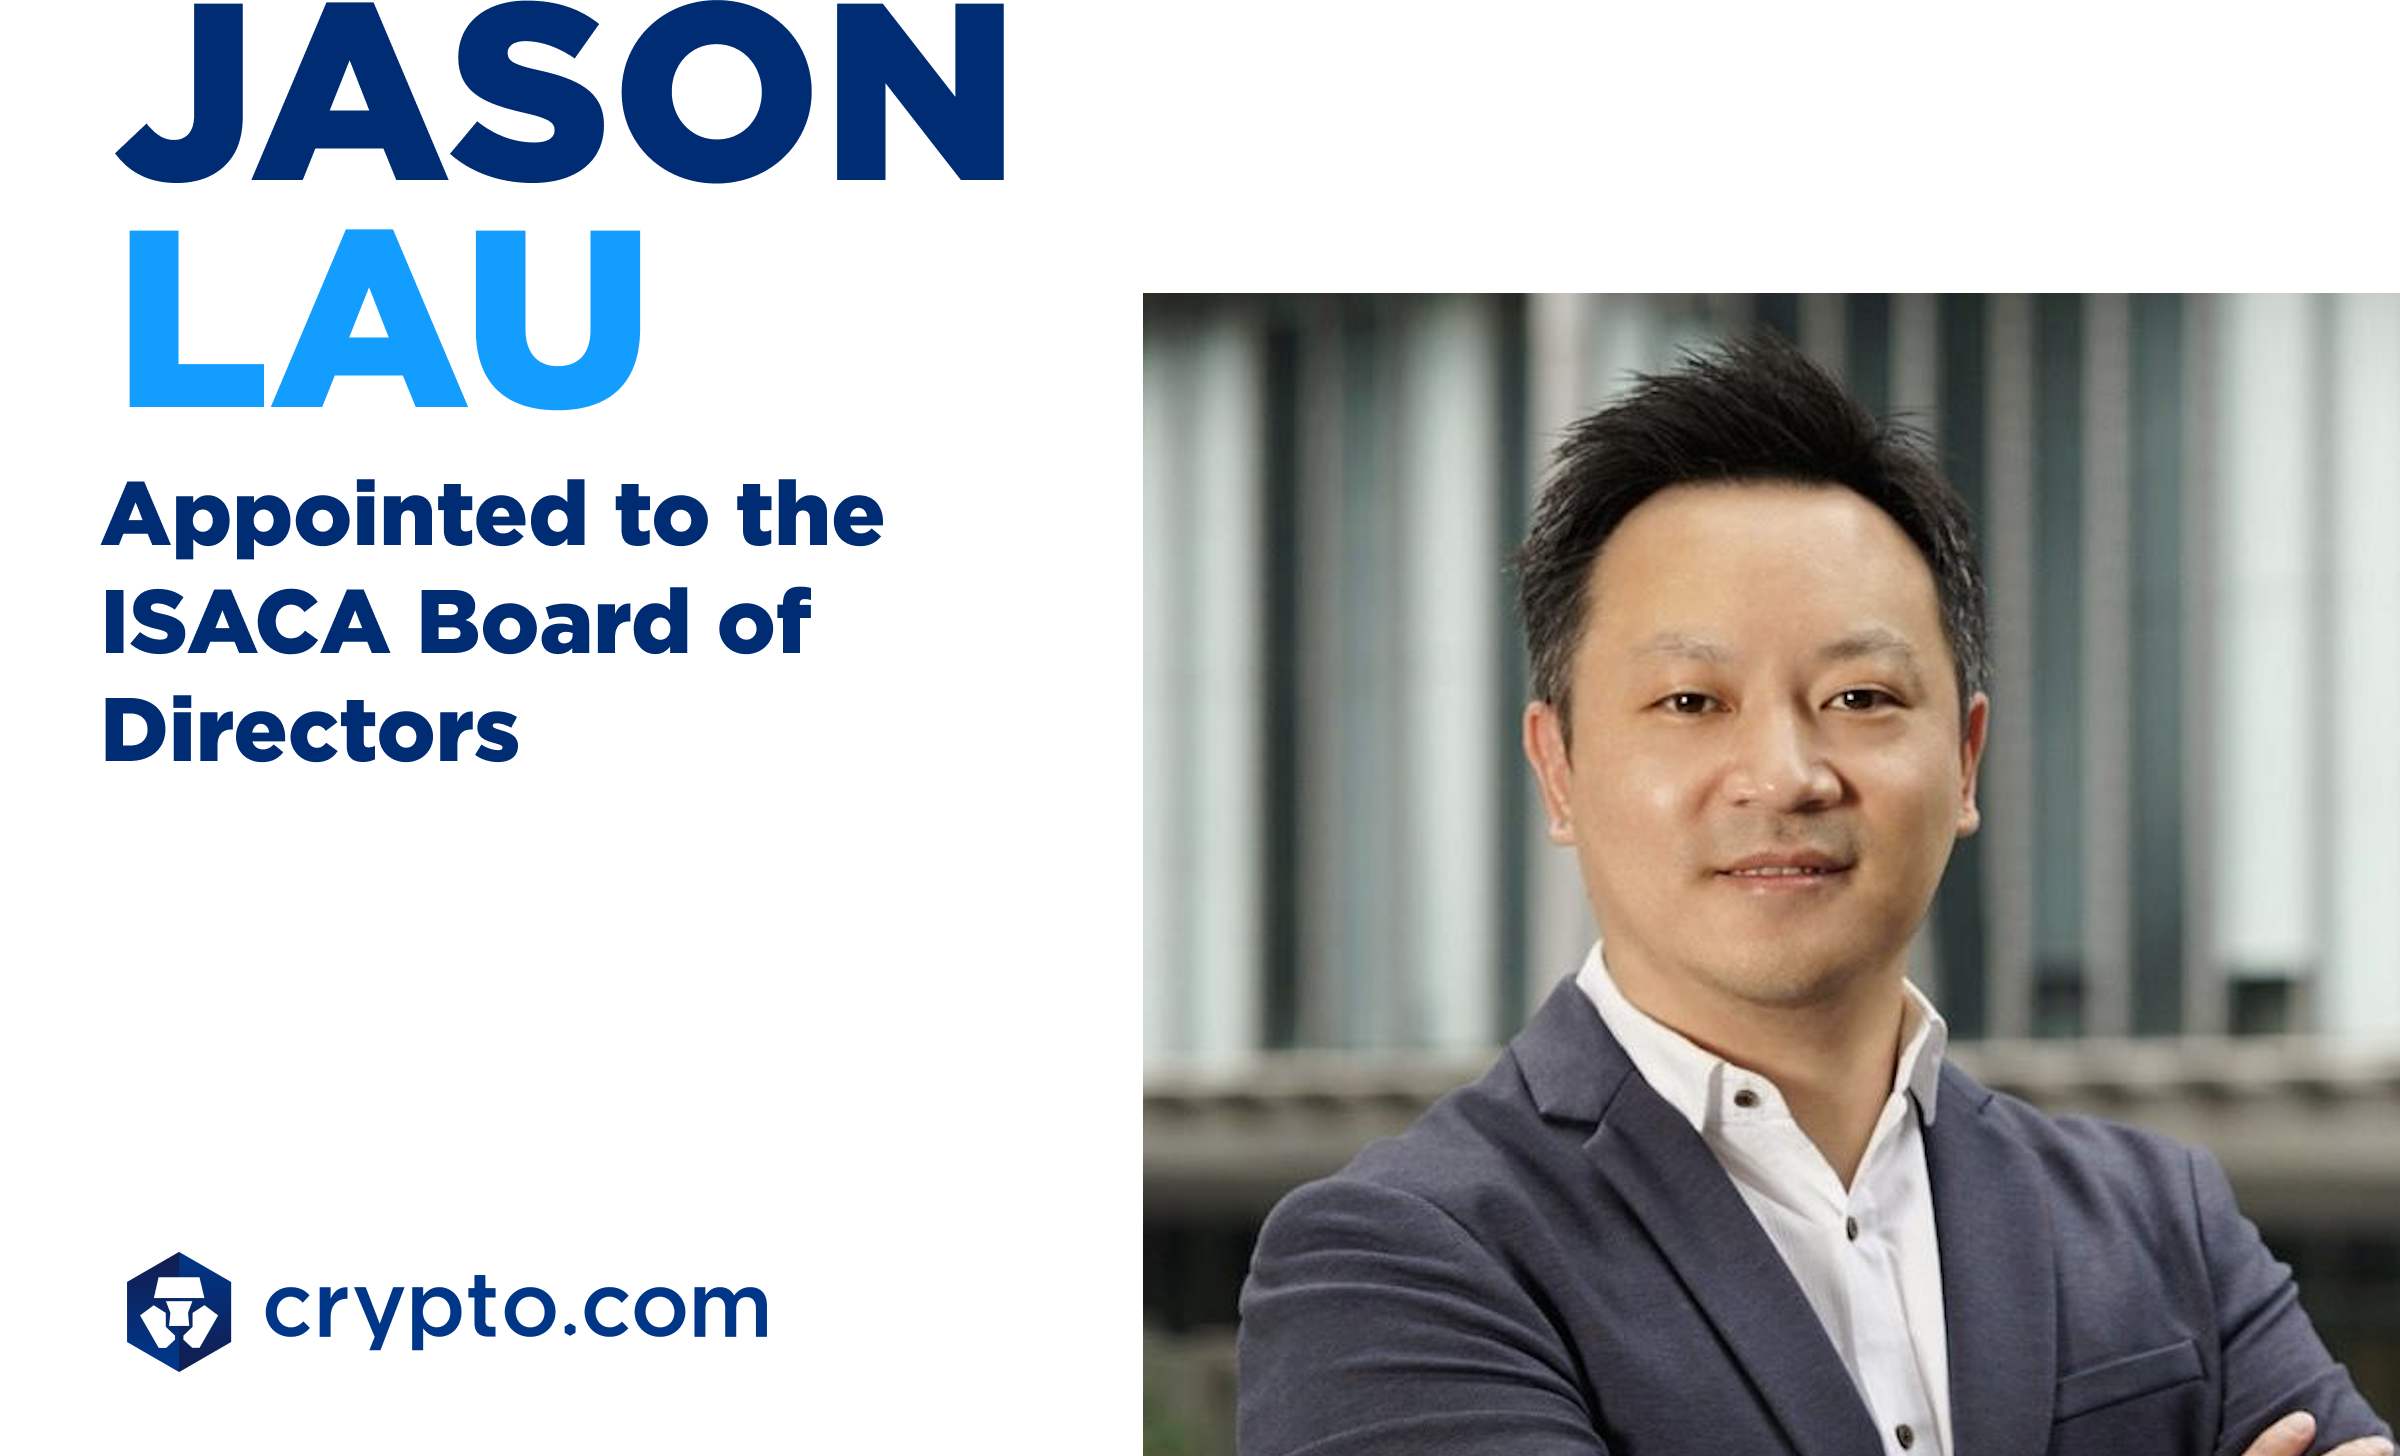 Jason Lau has been appointed to the ISACA Board of DIrectors